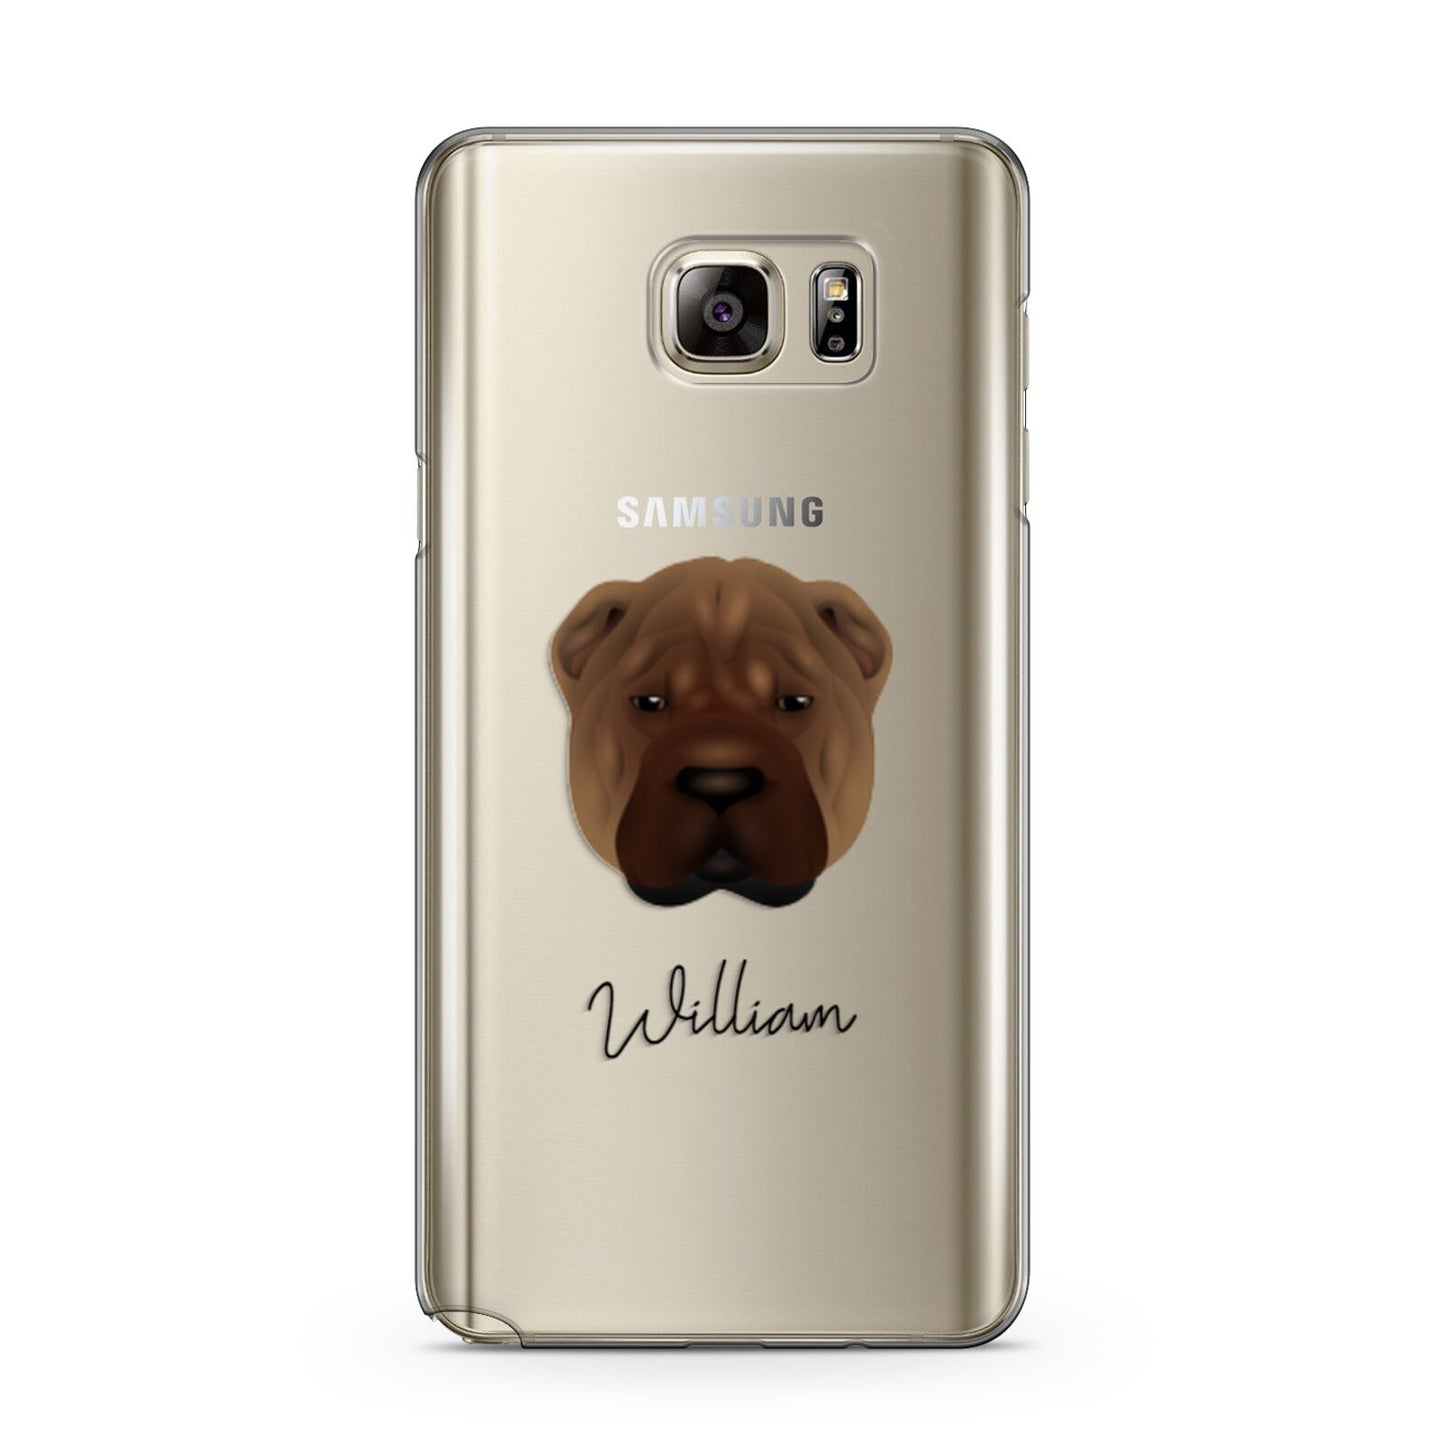 Shar Pei Personalised Samsung Galaxy Note 5 Case